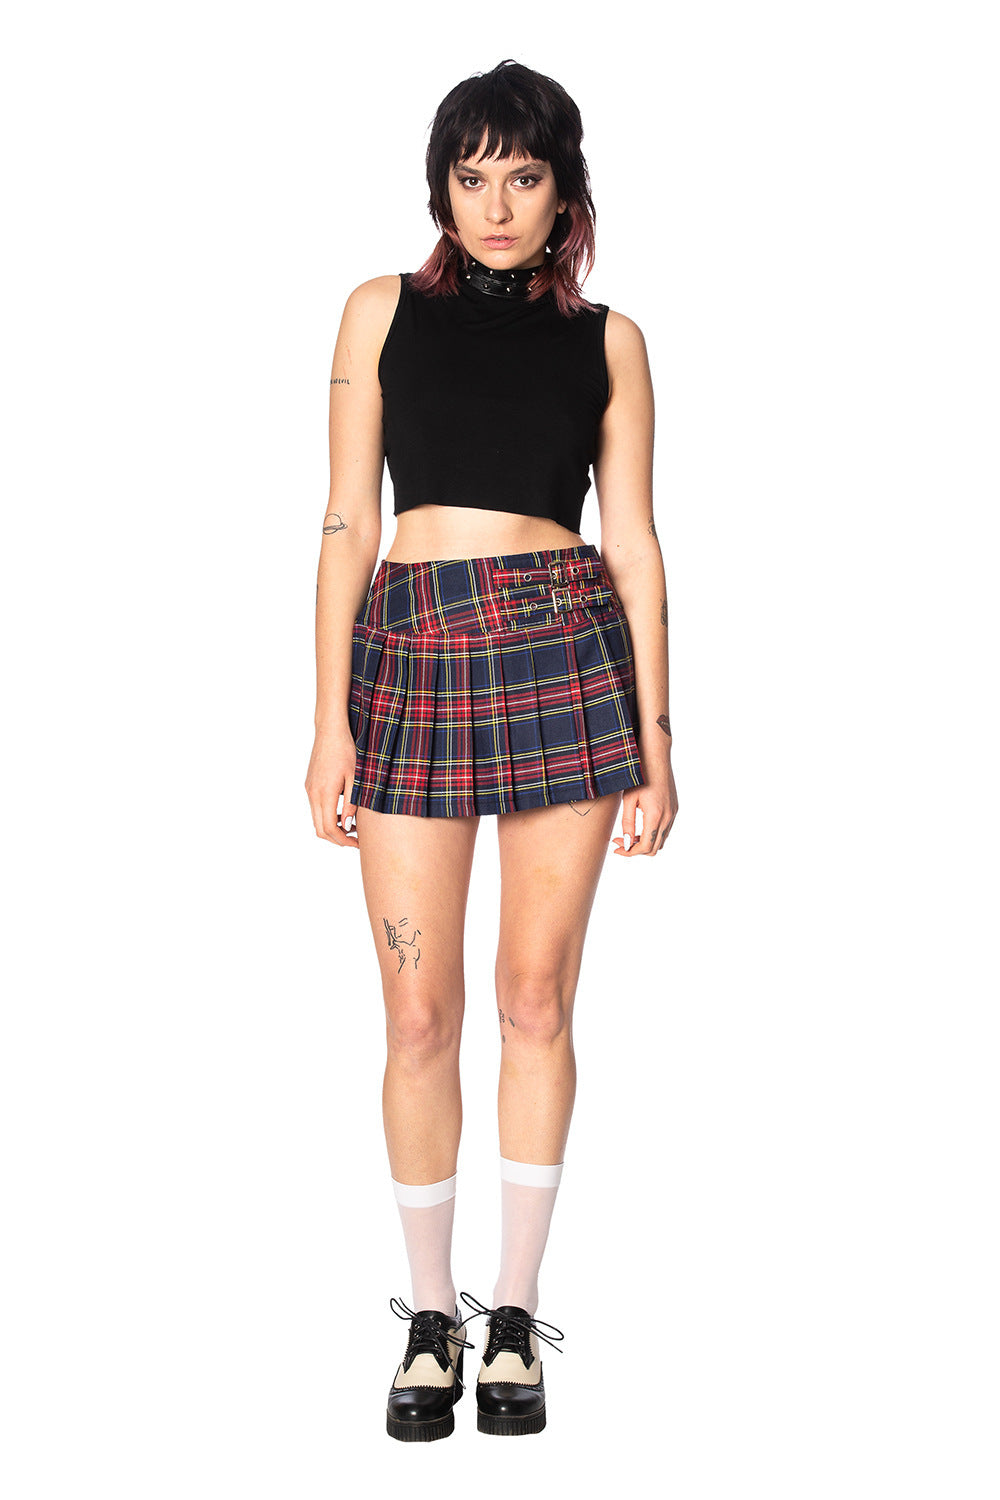 Alternative model in navy and red tartan skirt with crop top and white socks 